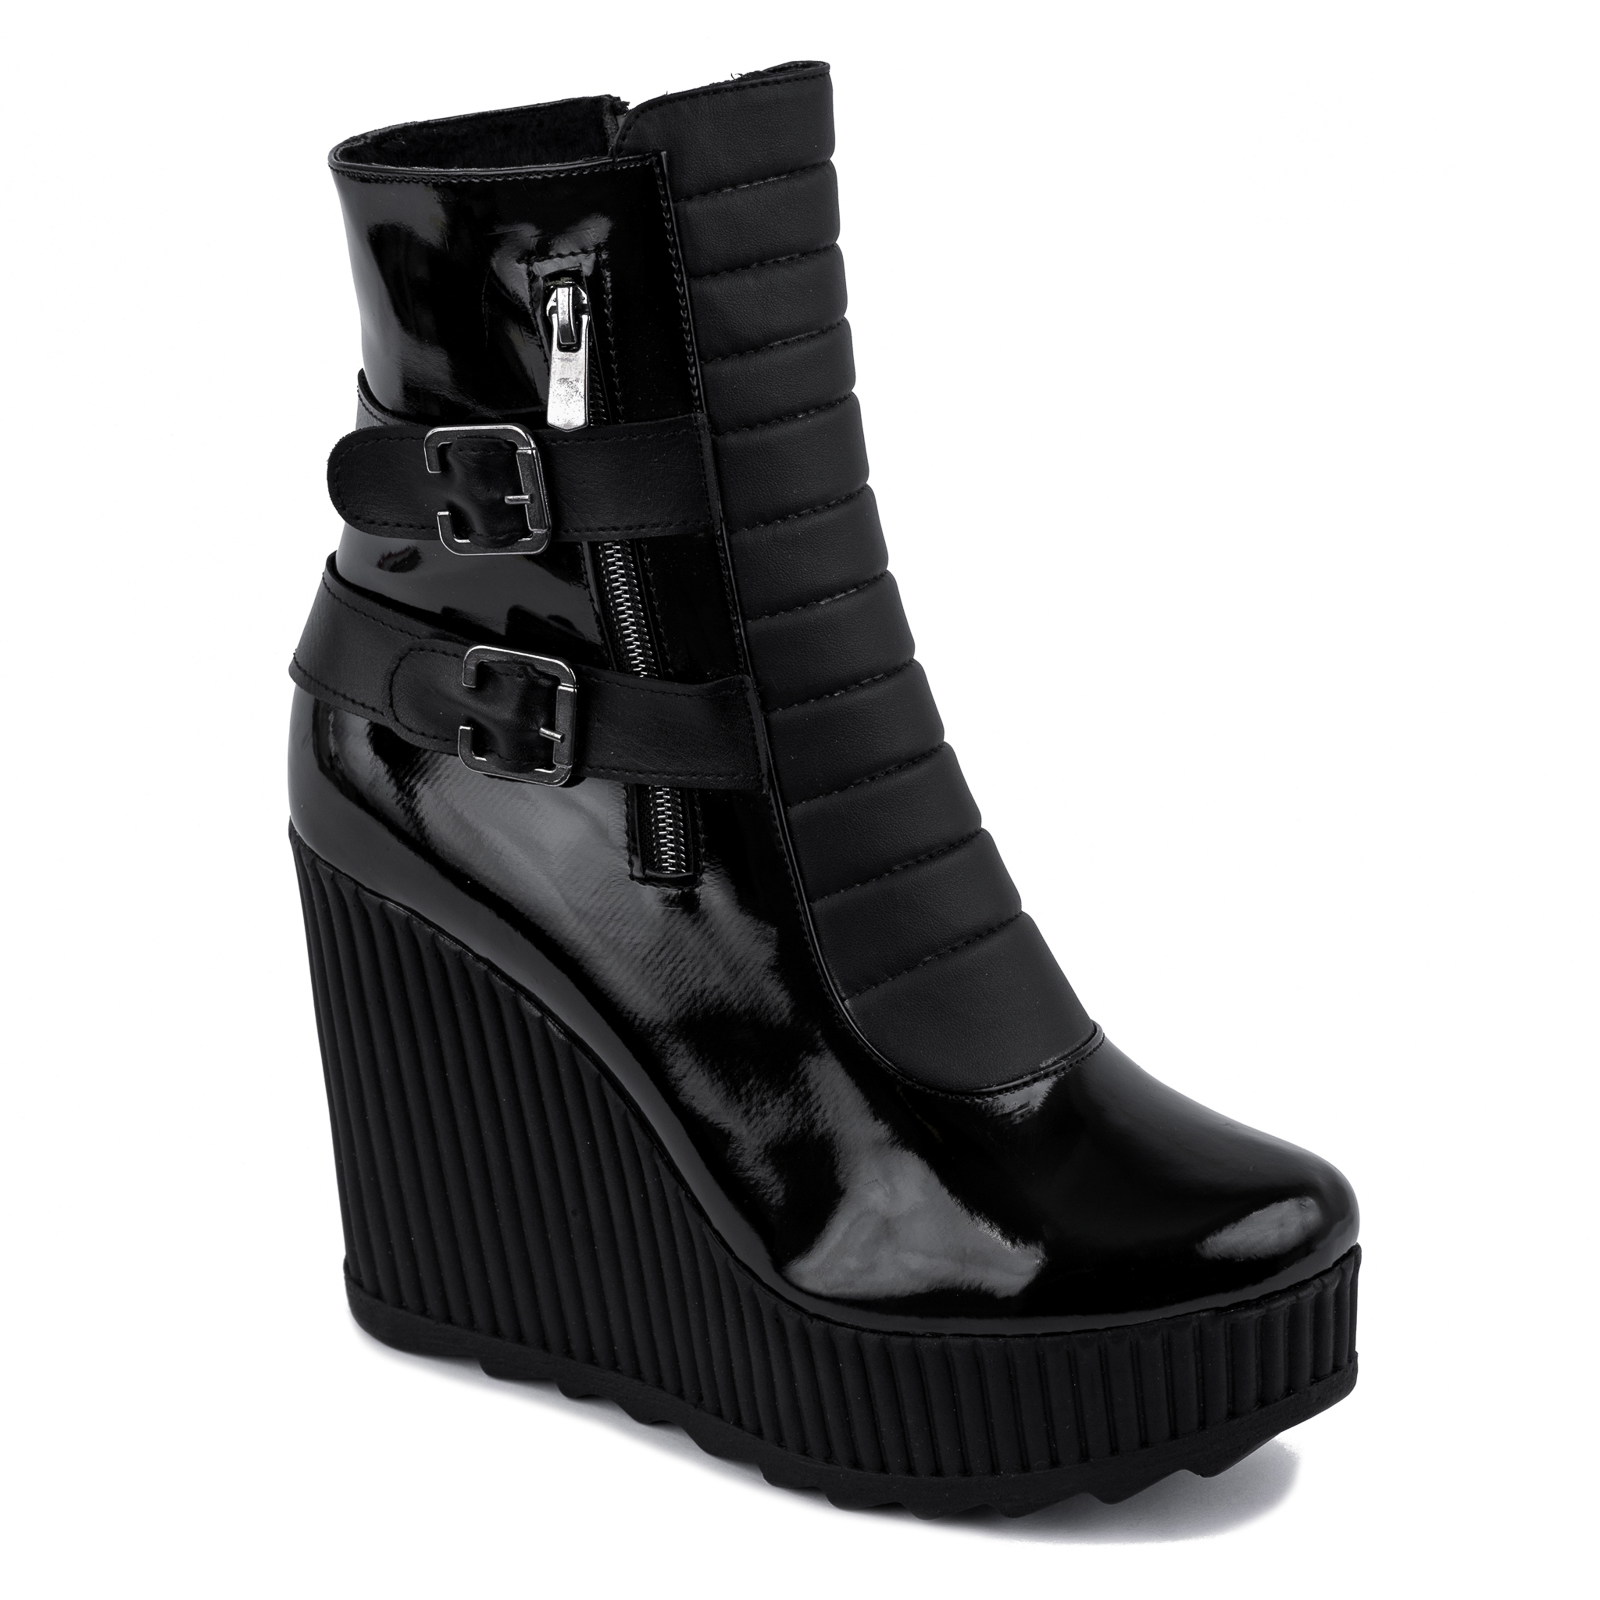 PATENT ANKLE BOOTS WITS BELTS - BLACK